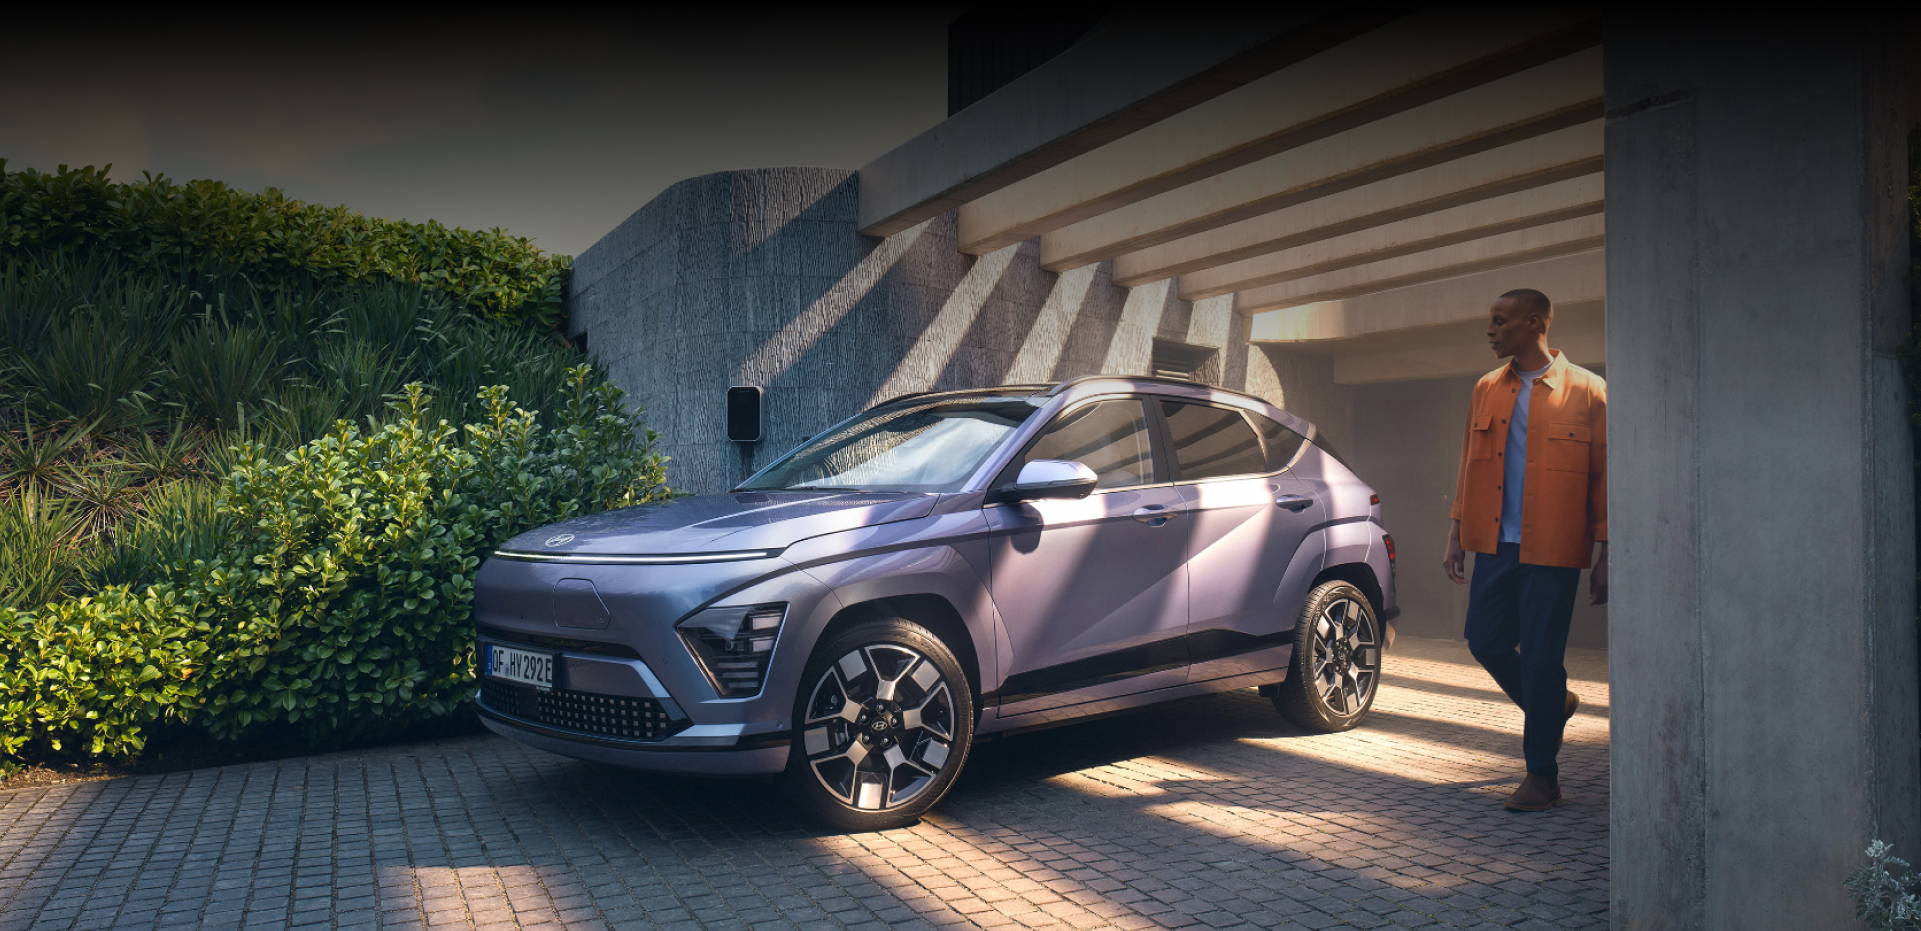 The Hyundai KONA Electric bathed in sunlight with a man walking away from a garage.